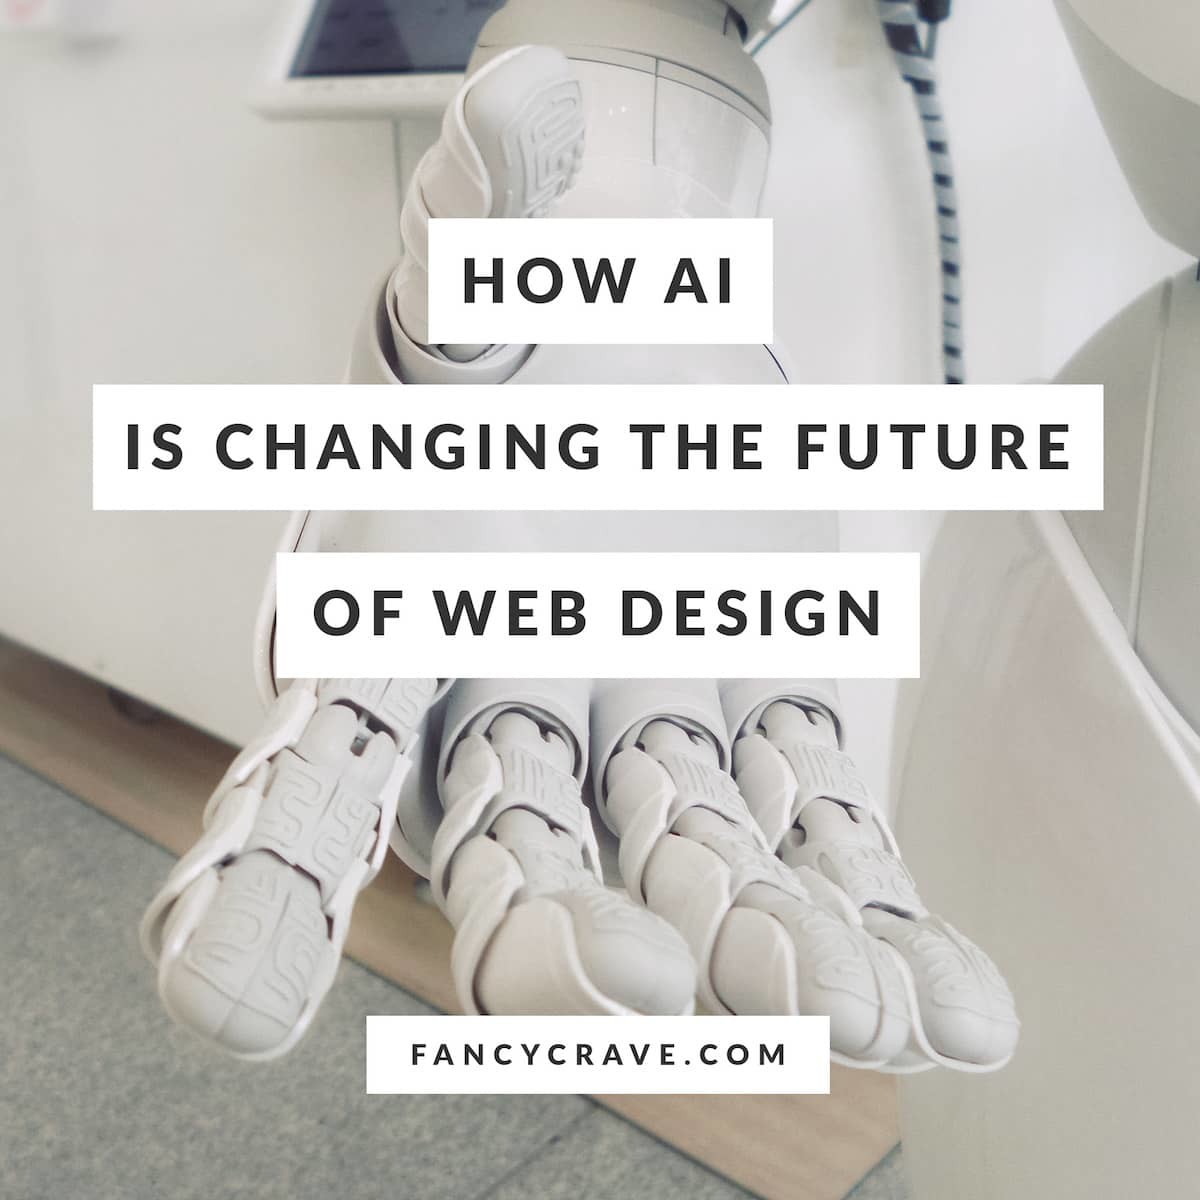 How Artificial Intelligence Is Changing the Future of Web Design